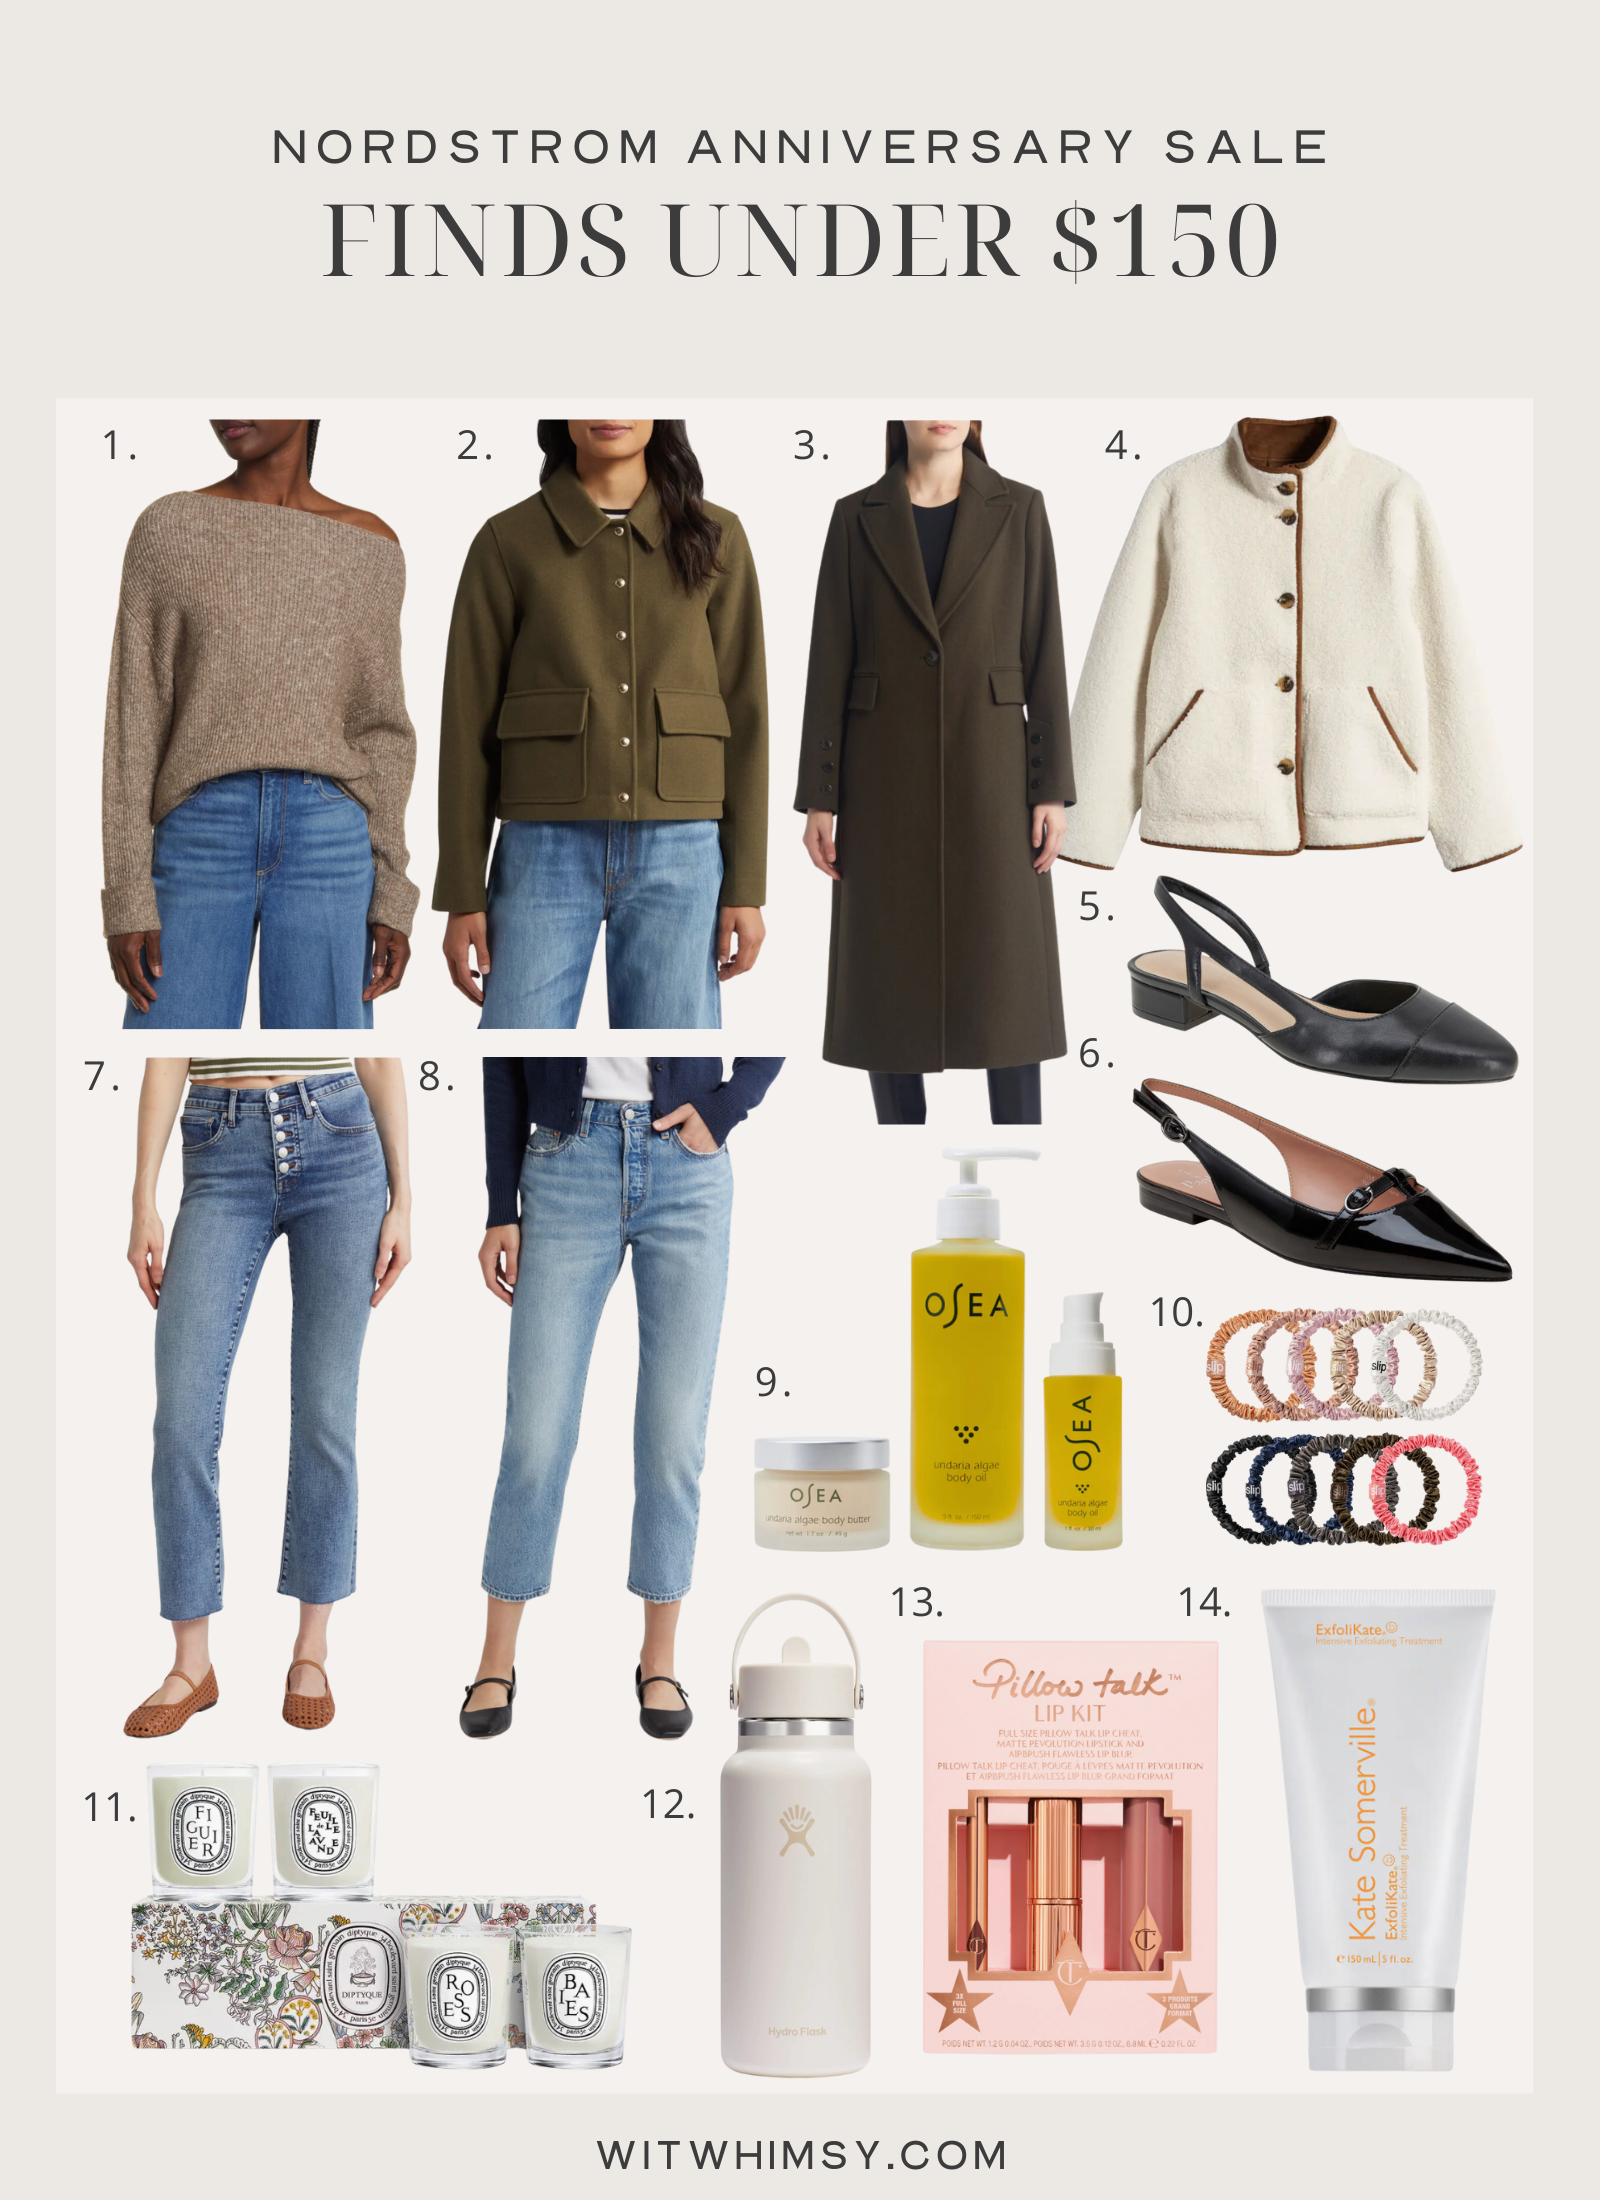 Collage of items under $150 from Nordstrom Anniversary Sale